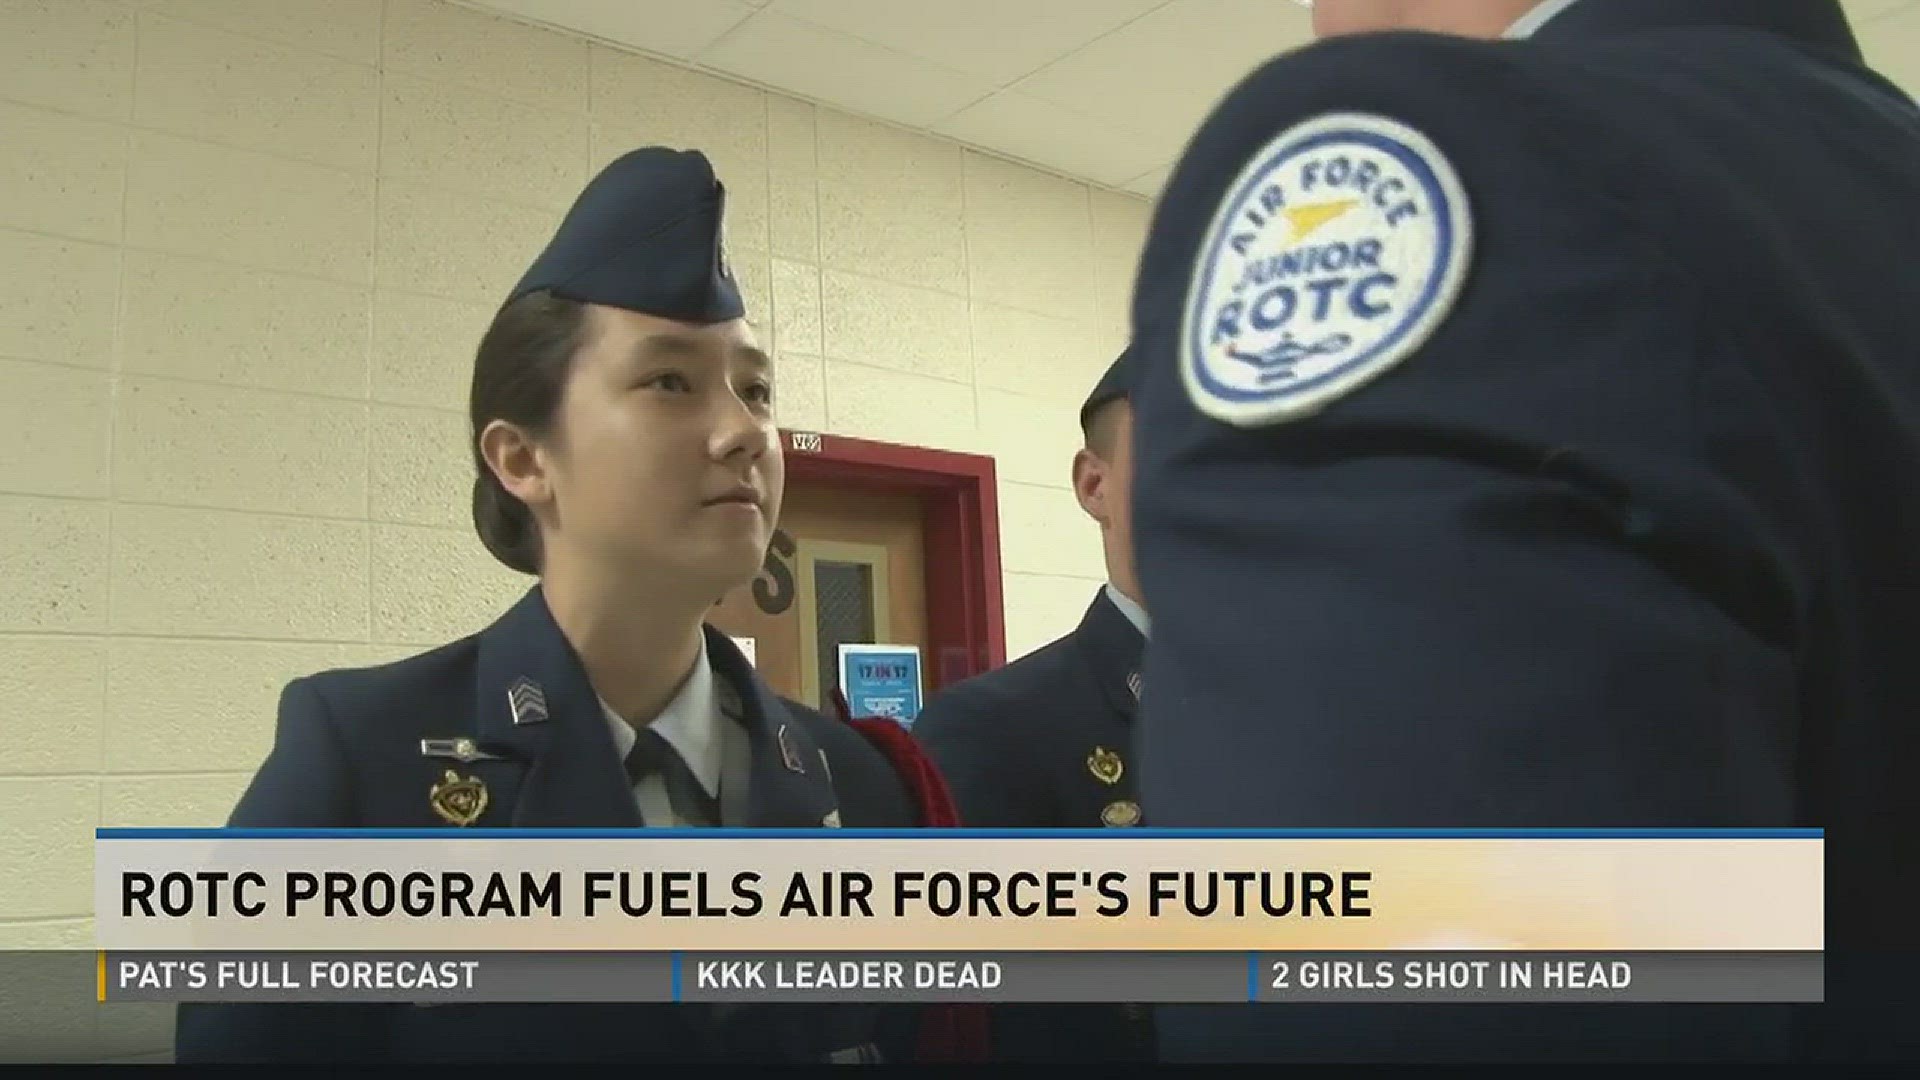 Junior ROTC cadets at Warner Robins High School say the program gives students a chance to learn more about the Air Force and the opportunities available after graduation.